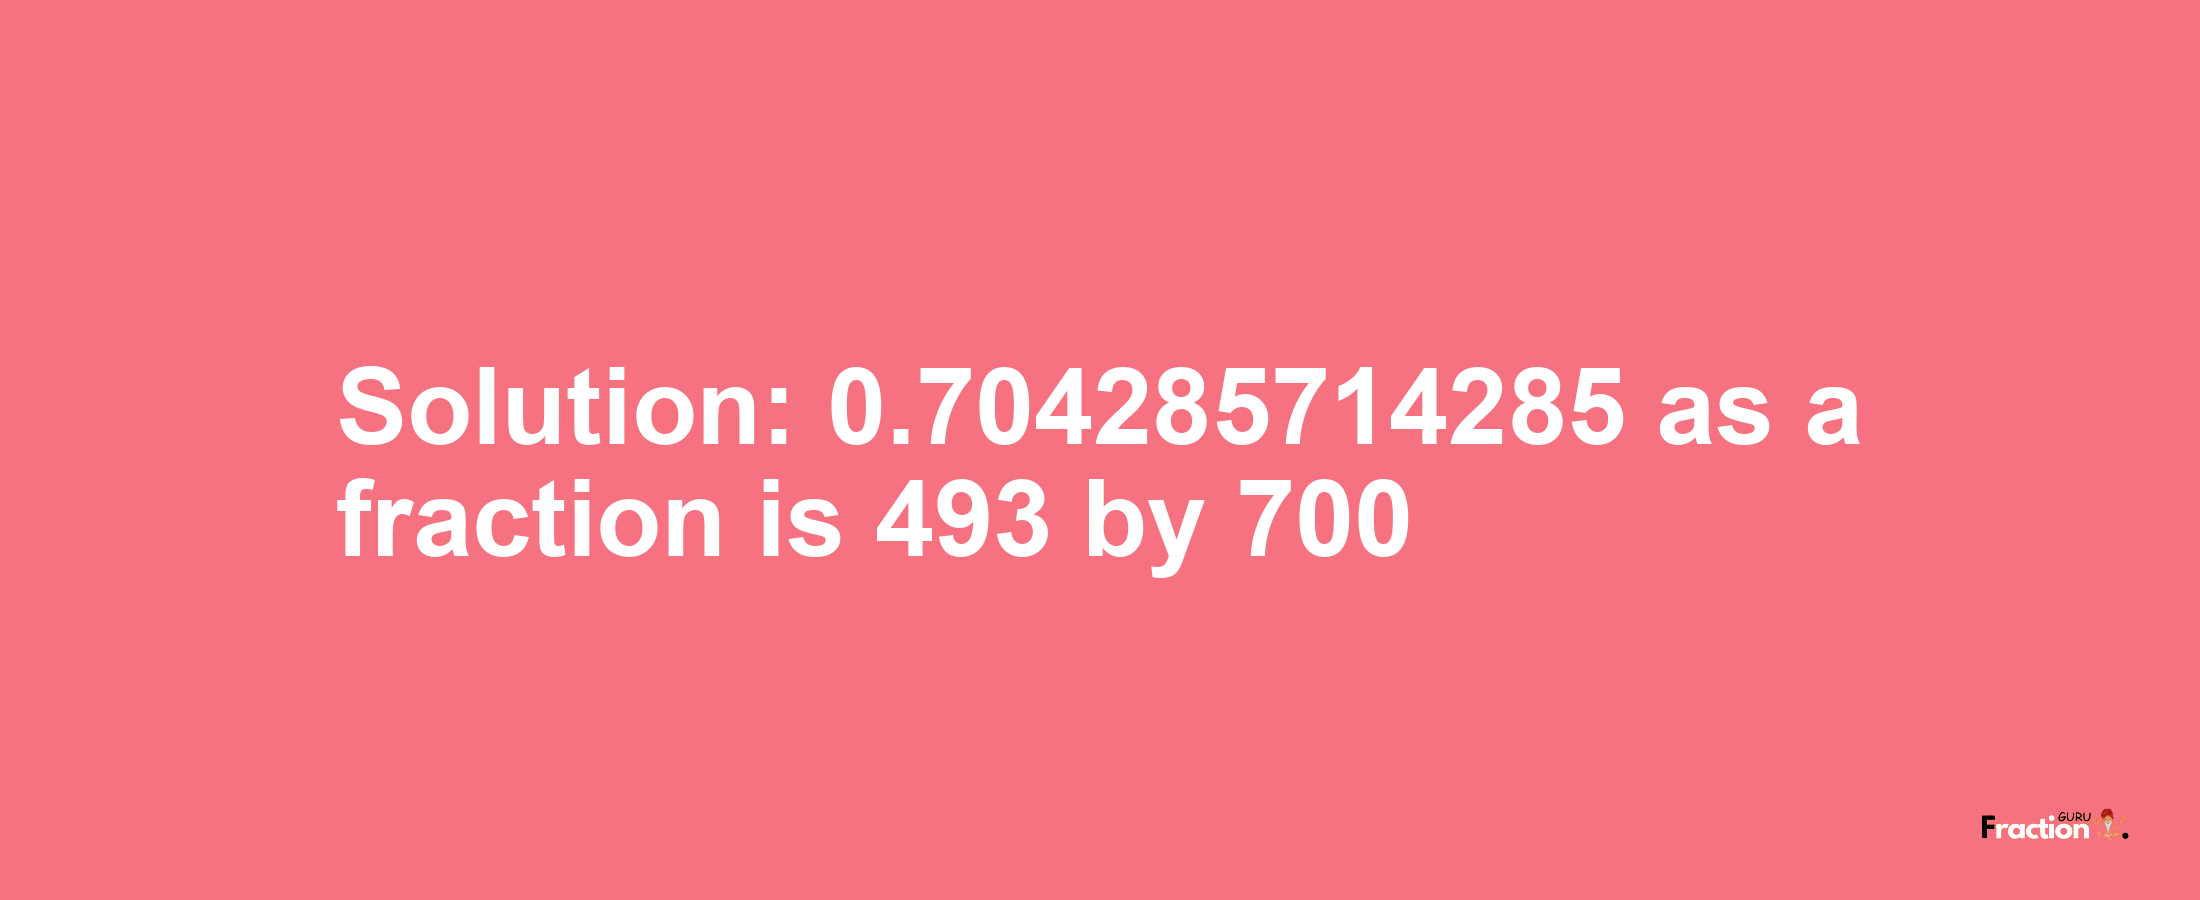 Solution:0.704285714285 as a fraction is 493/700